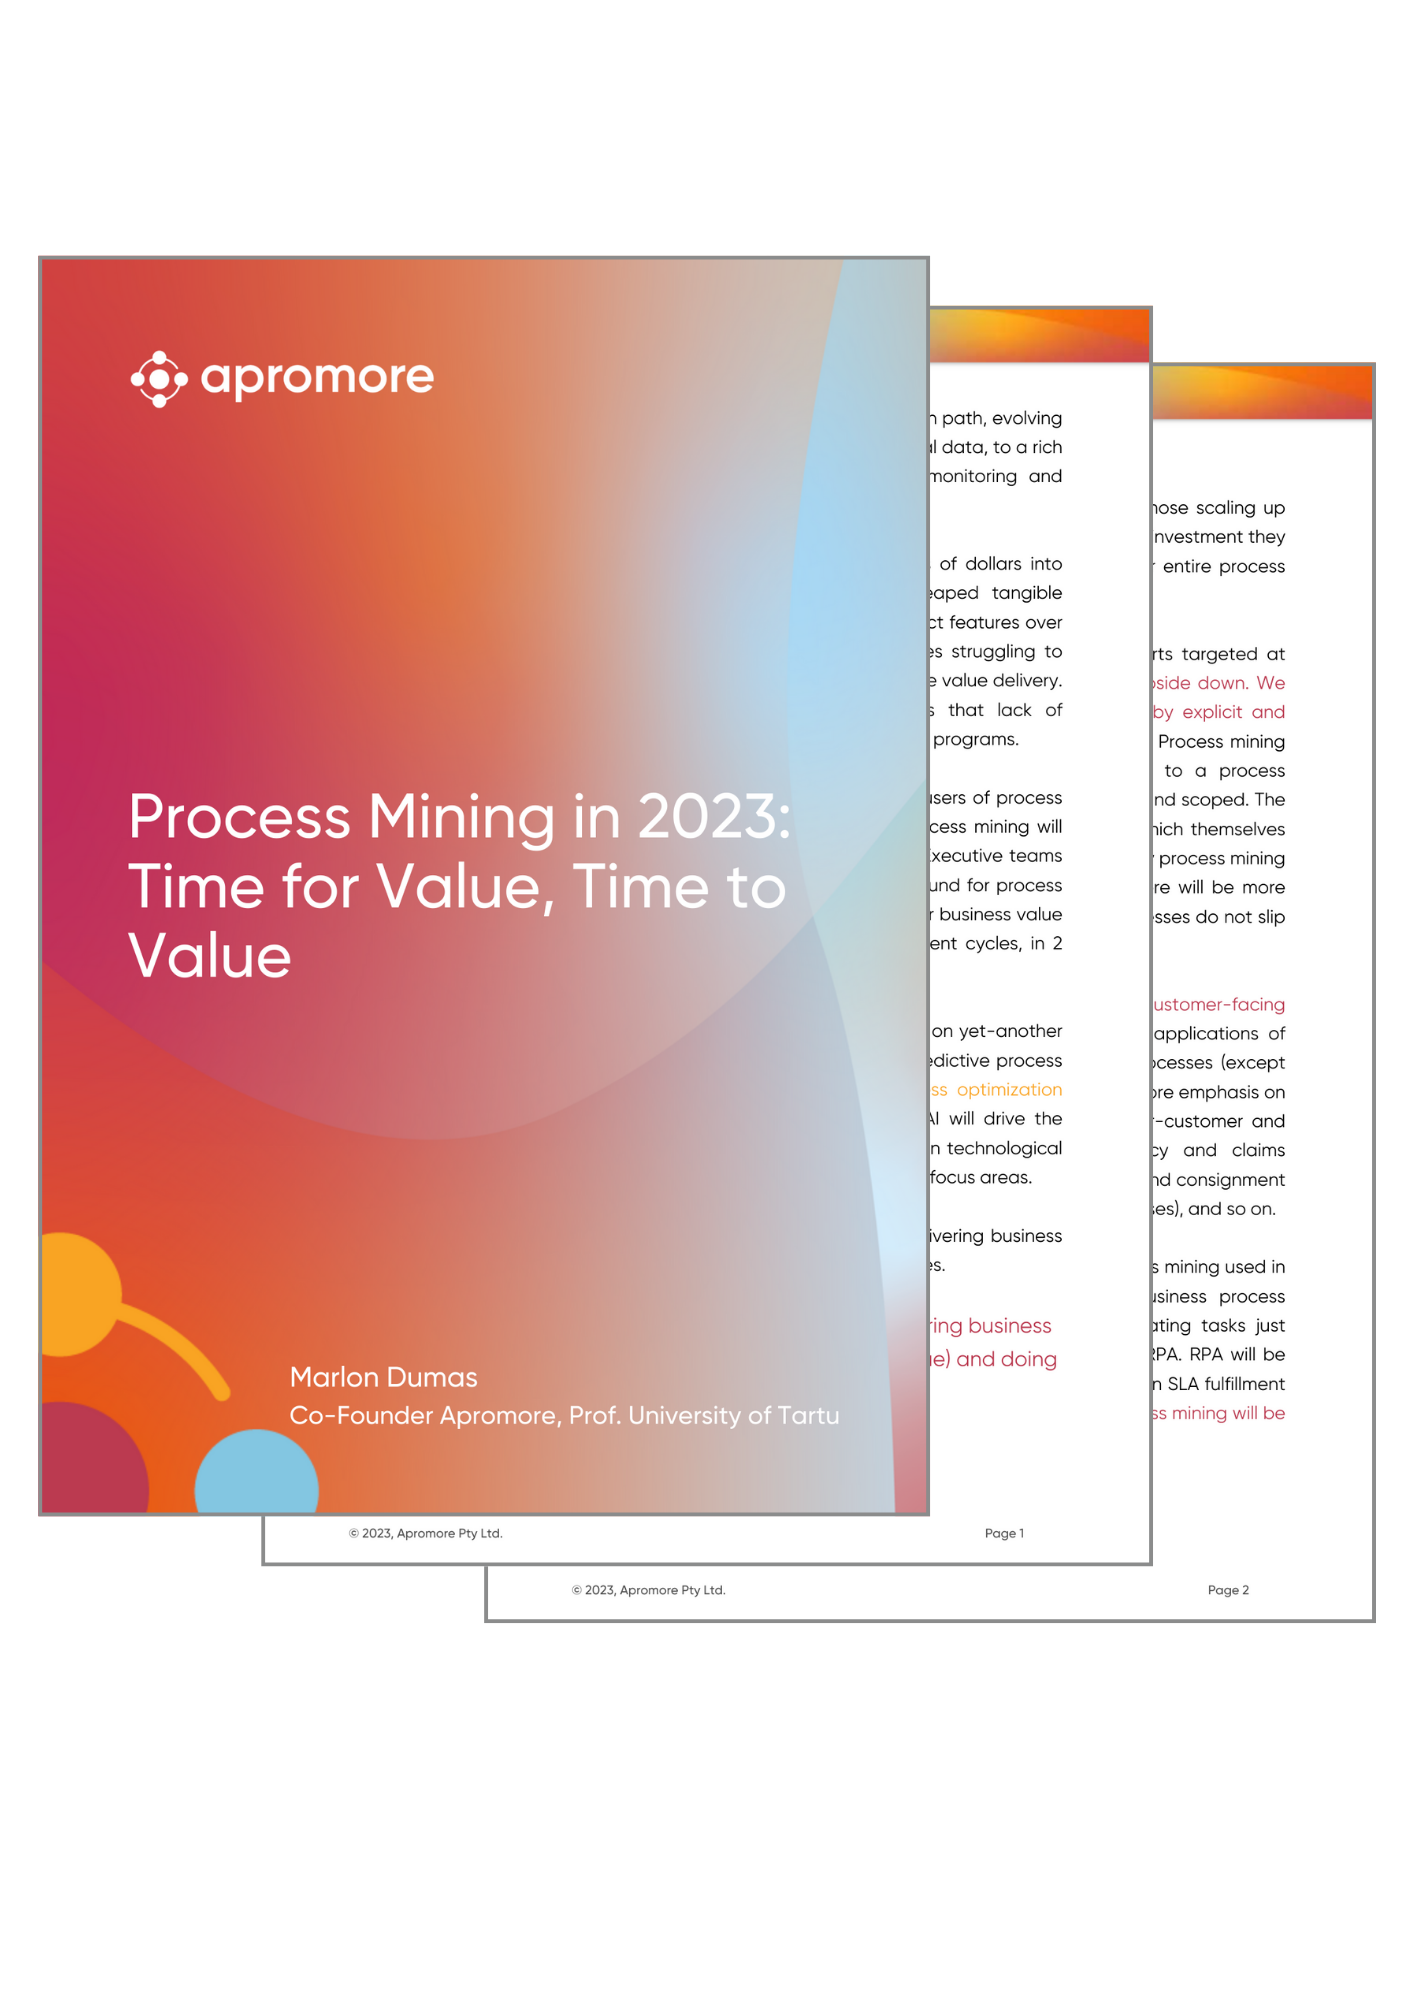 Process Mining in 2023: Time for Value, Time to Value